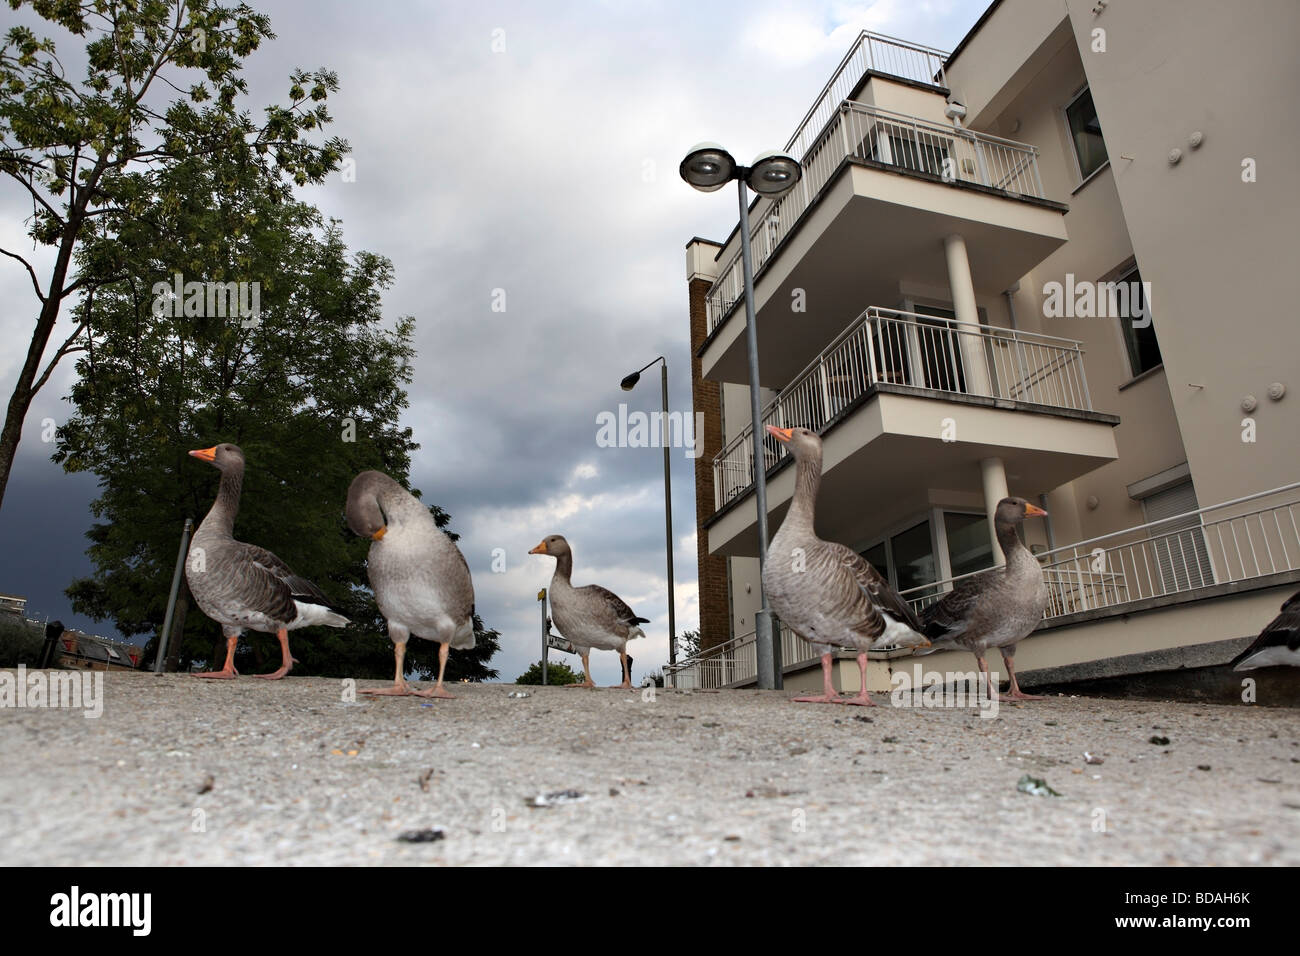 Ducks graze freely in front of a modern building in the proximity of the River Thames. Stock Photo